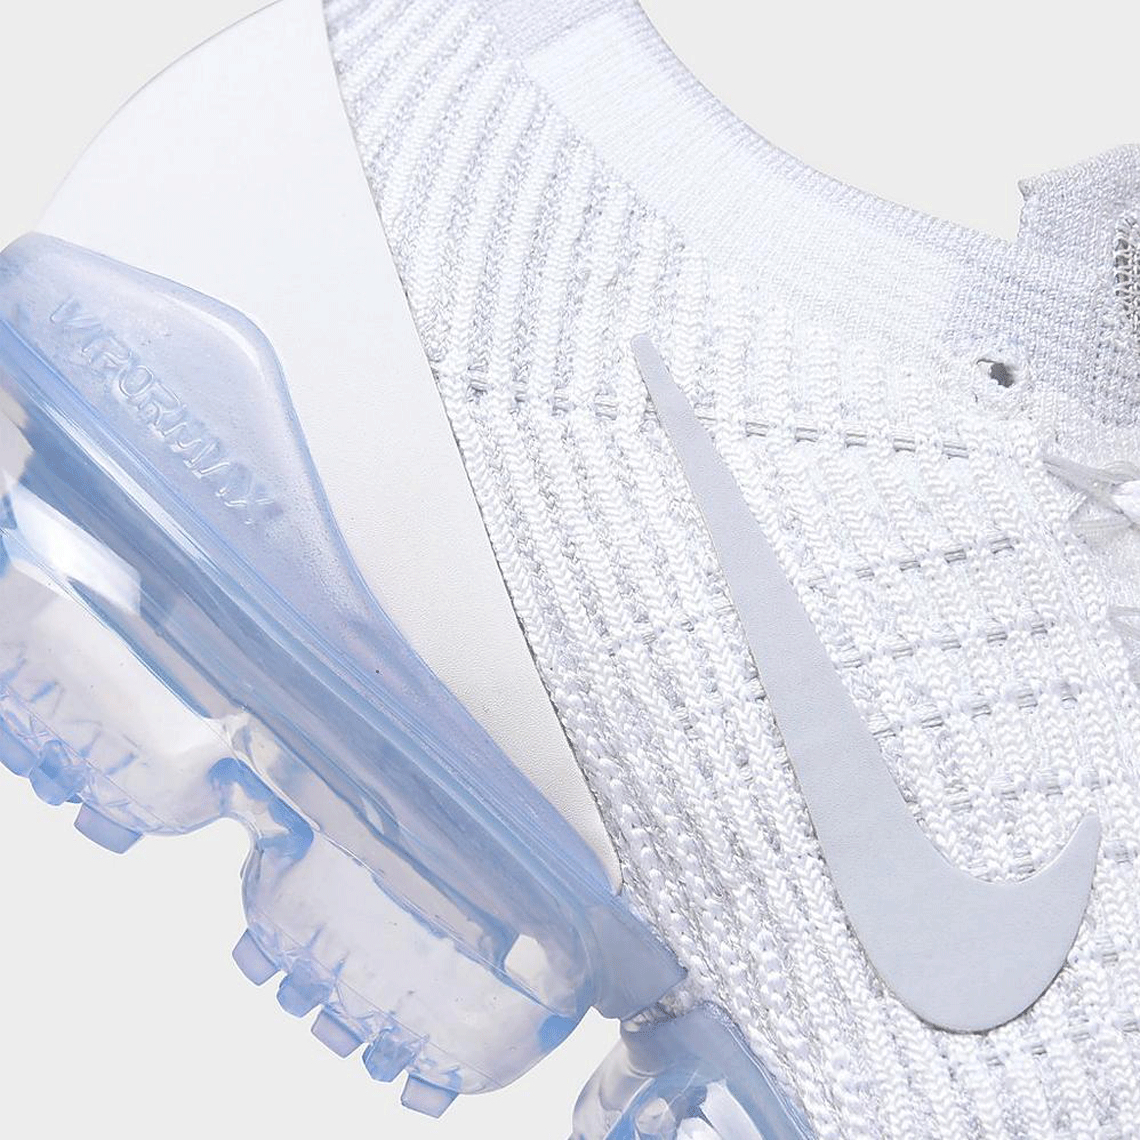 vapormax flyknit 3 one of one